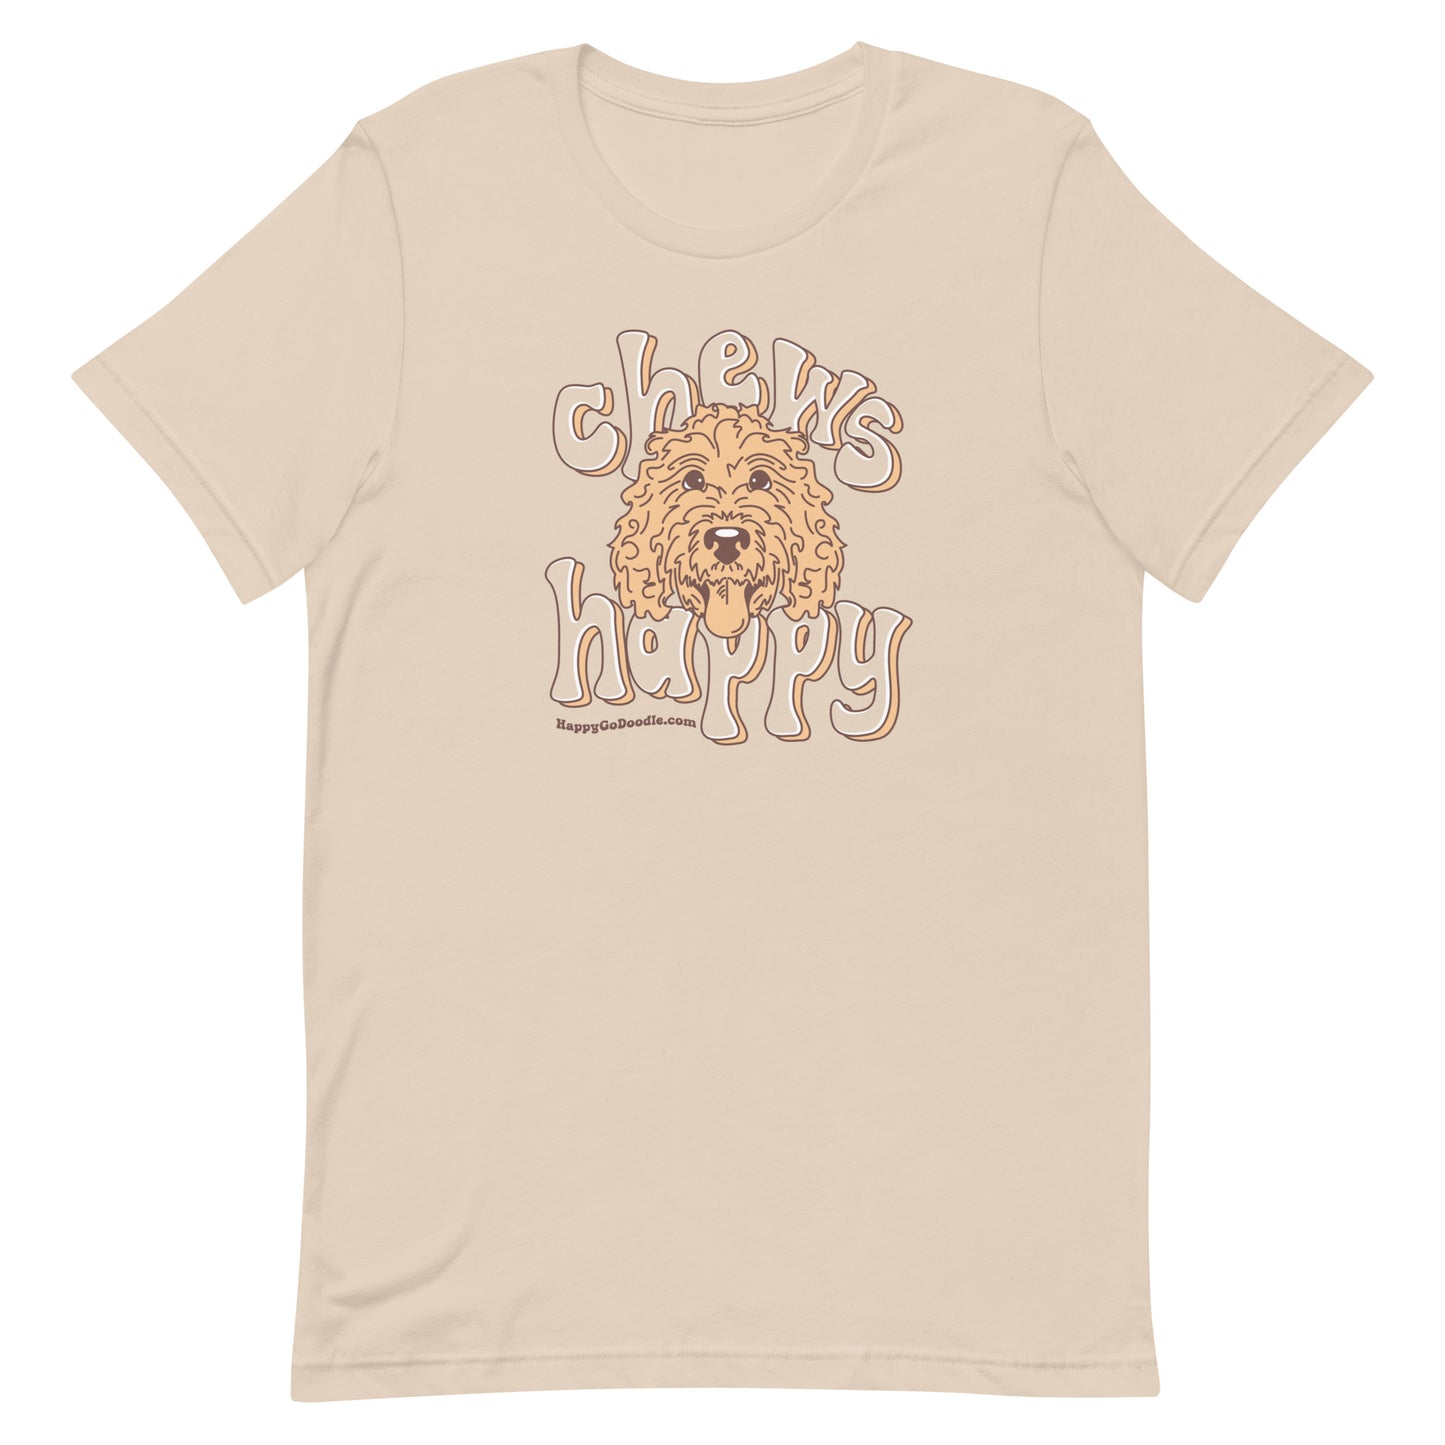 Goldendoodle crew neck sweatshirt with Goldendoodle face and words "Chews Happy" in soft cream color